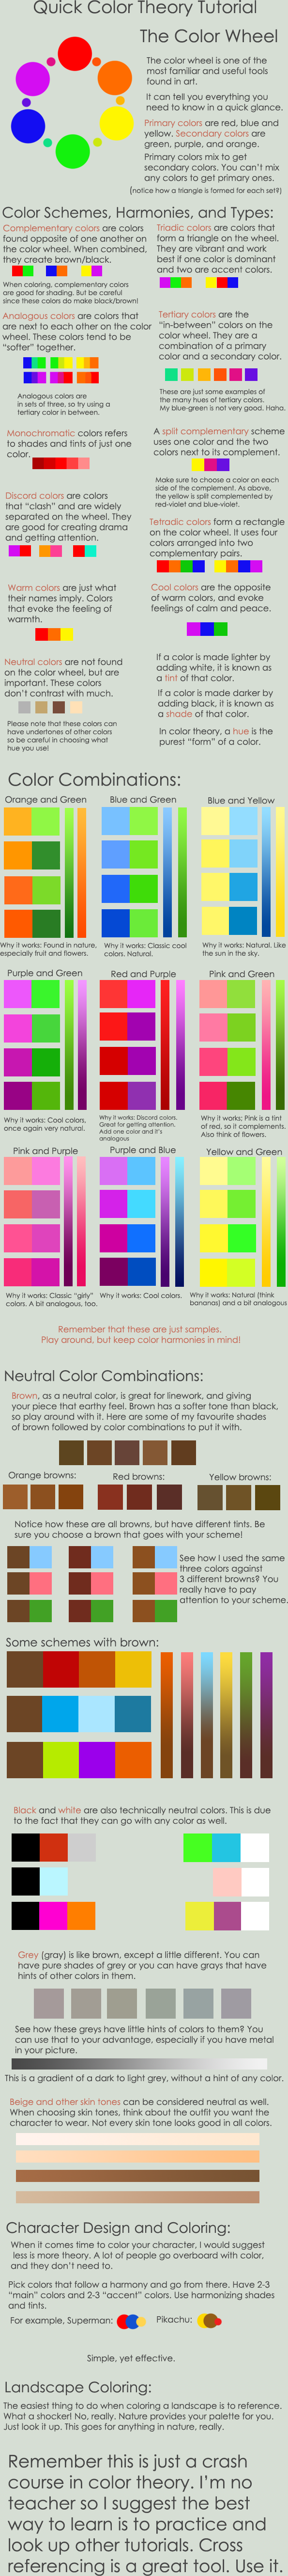 Color_Theory_Crash_Course_by_pronouncedyou.png